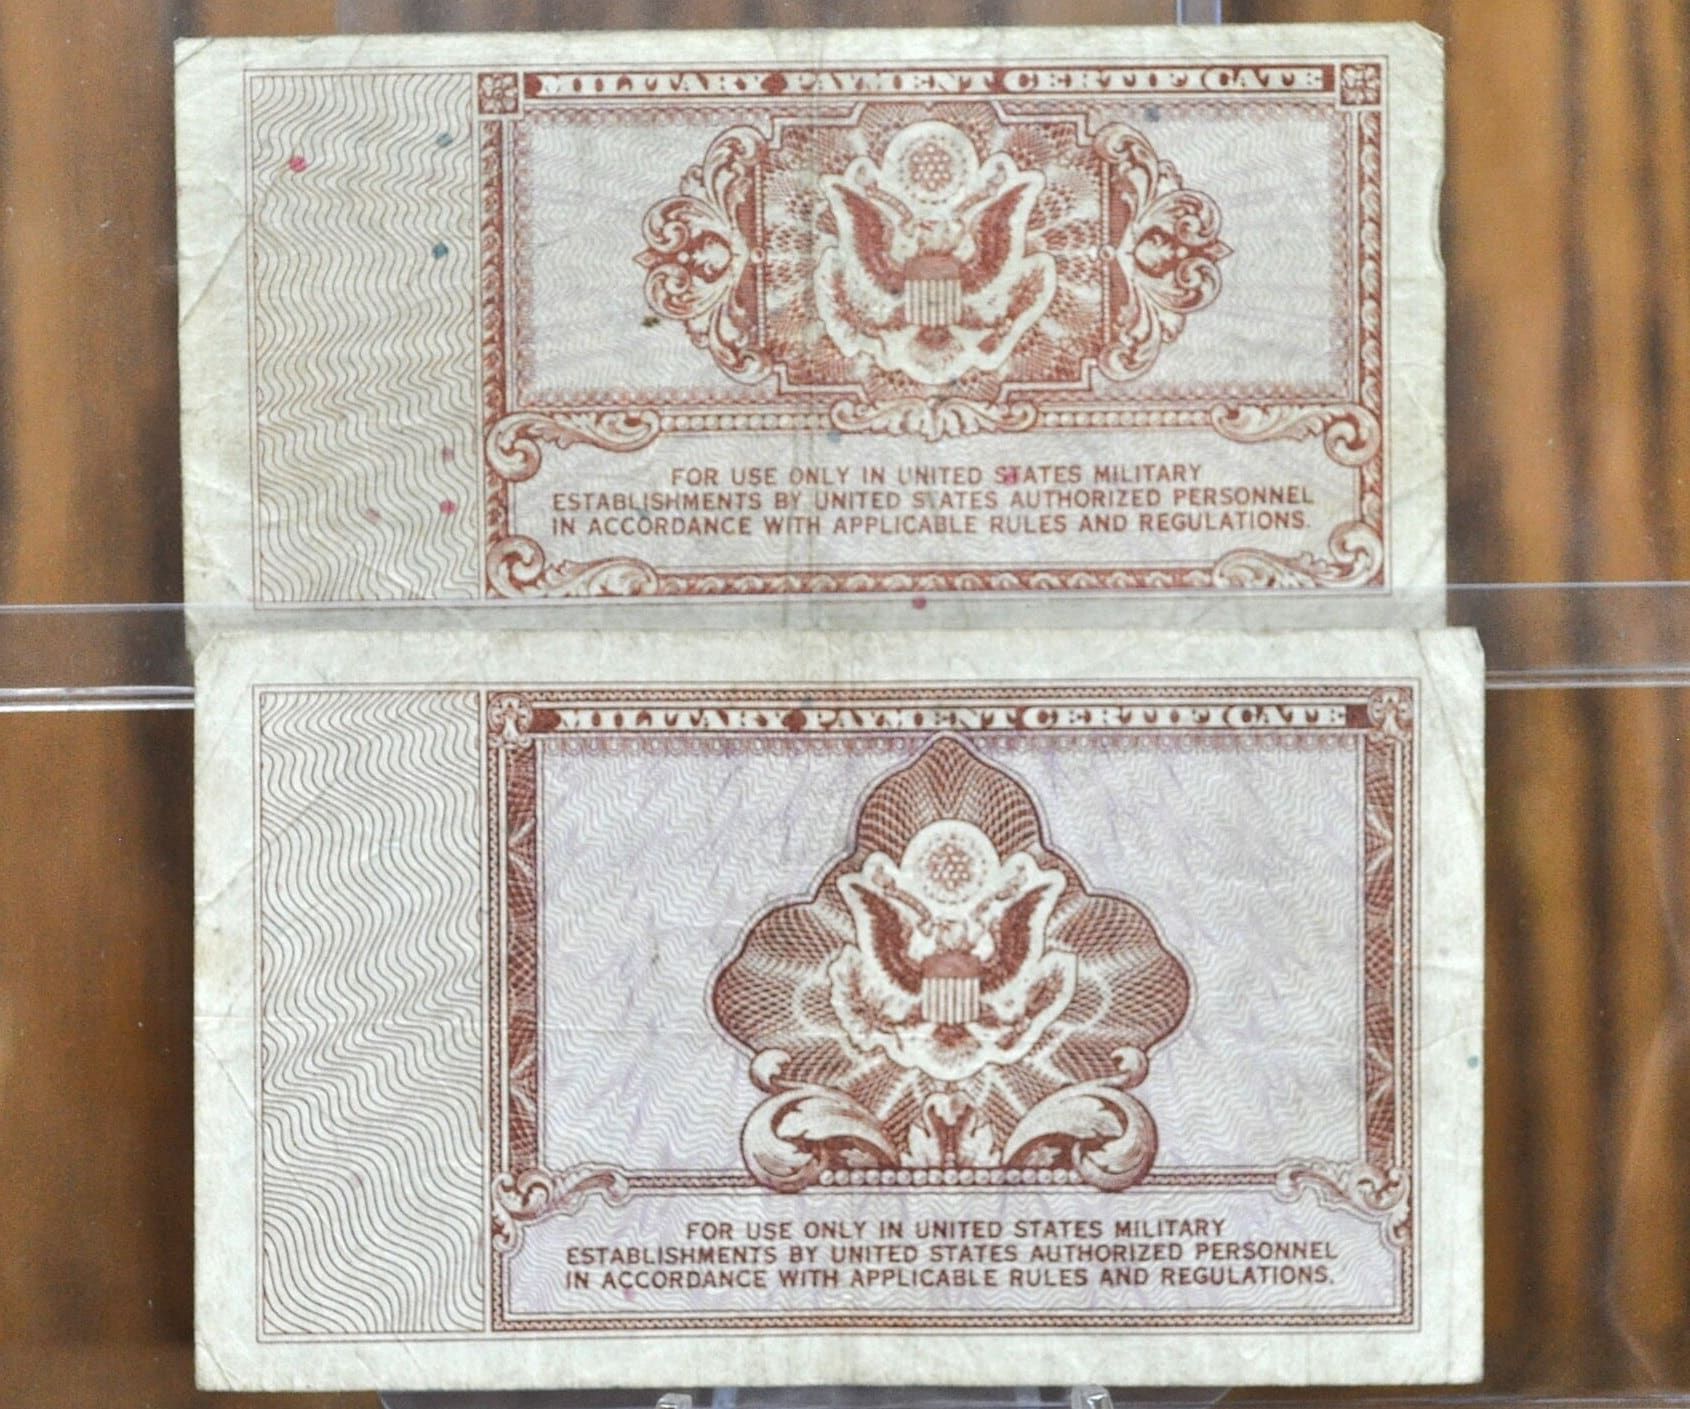 Set of Two Military Payment Certificates Series 472 - 10 Cent and 1 Dollar MPCs From Series 472 - Military Payment Certificates 1948